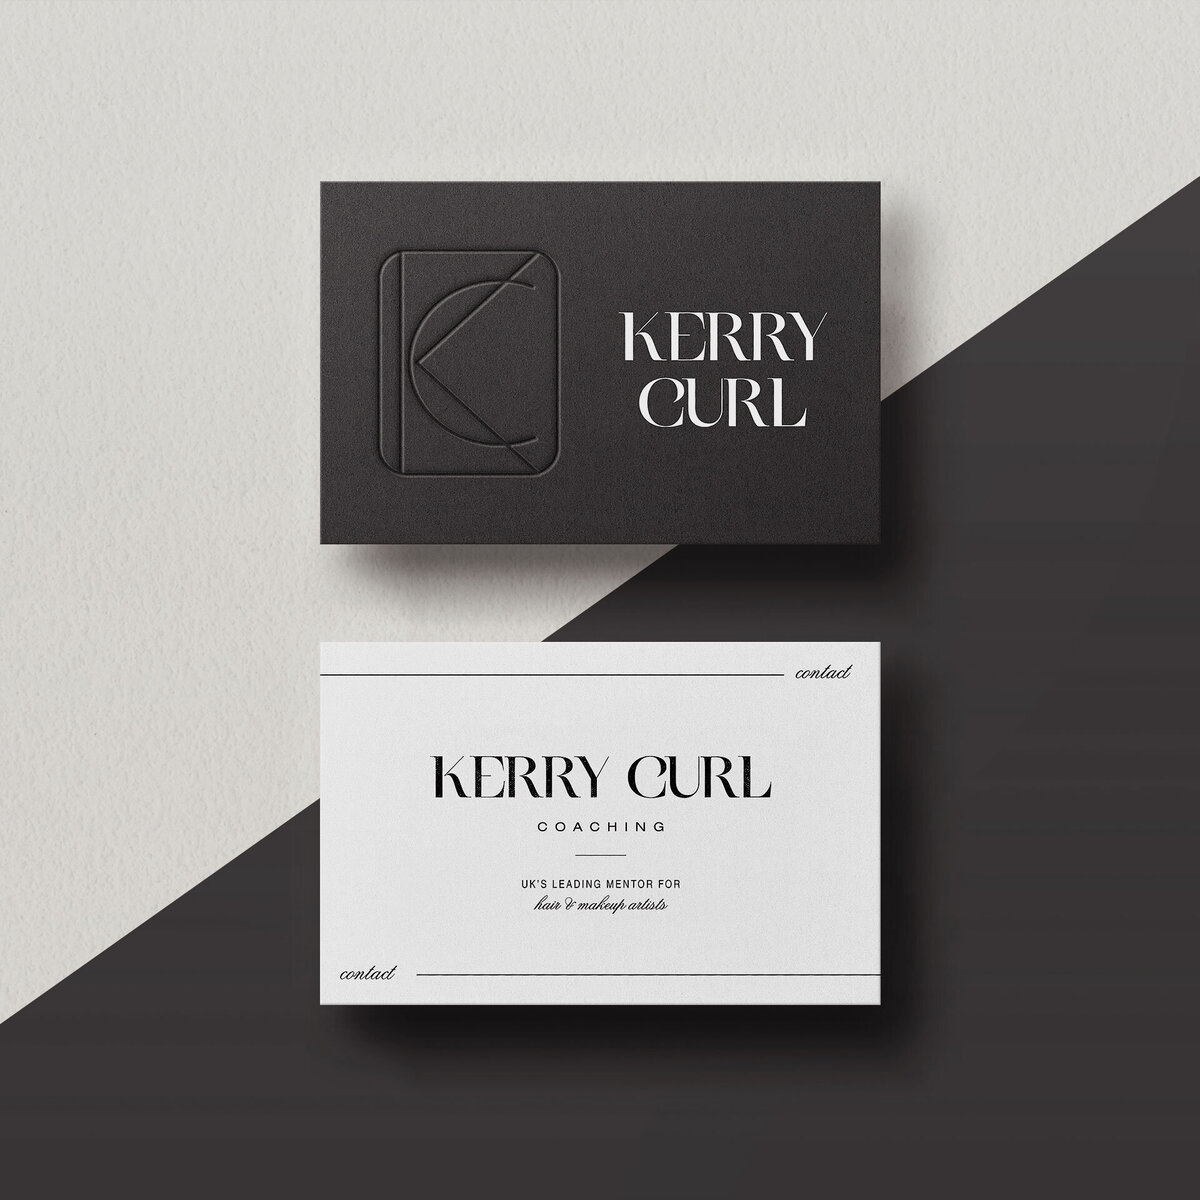 Mockup of luxury brand business cards